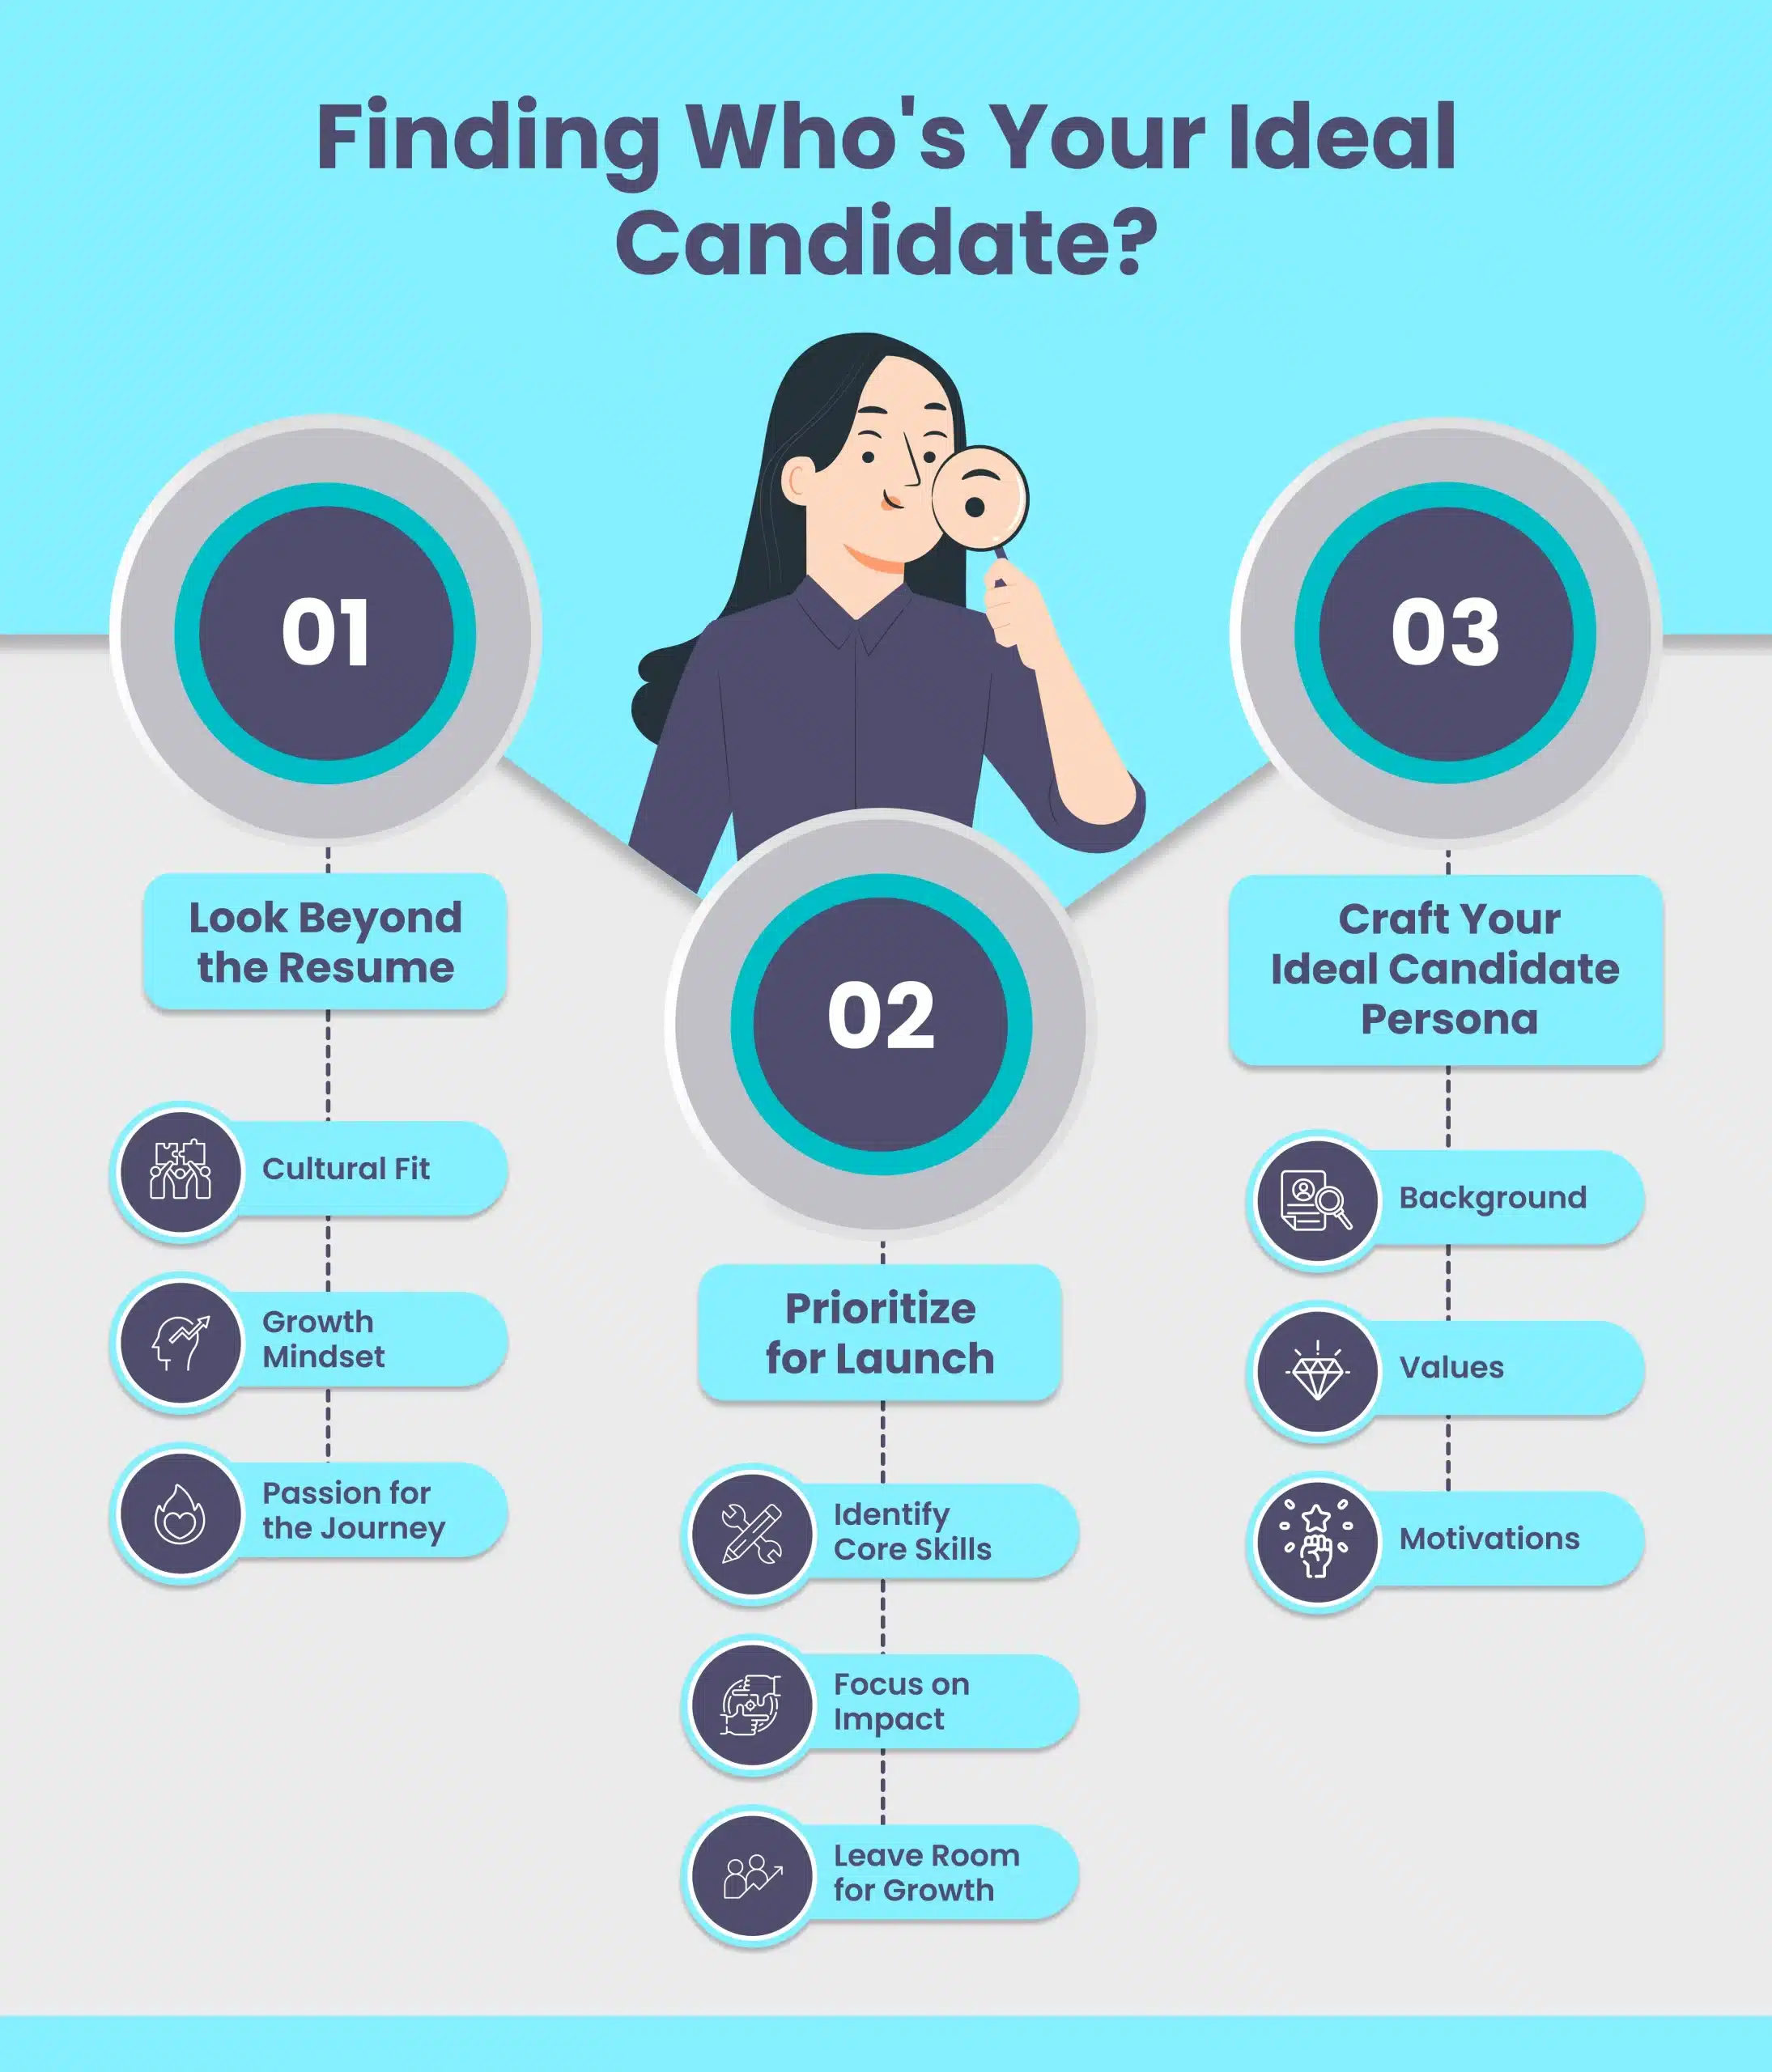 Who's Your Ideal Candidate?